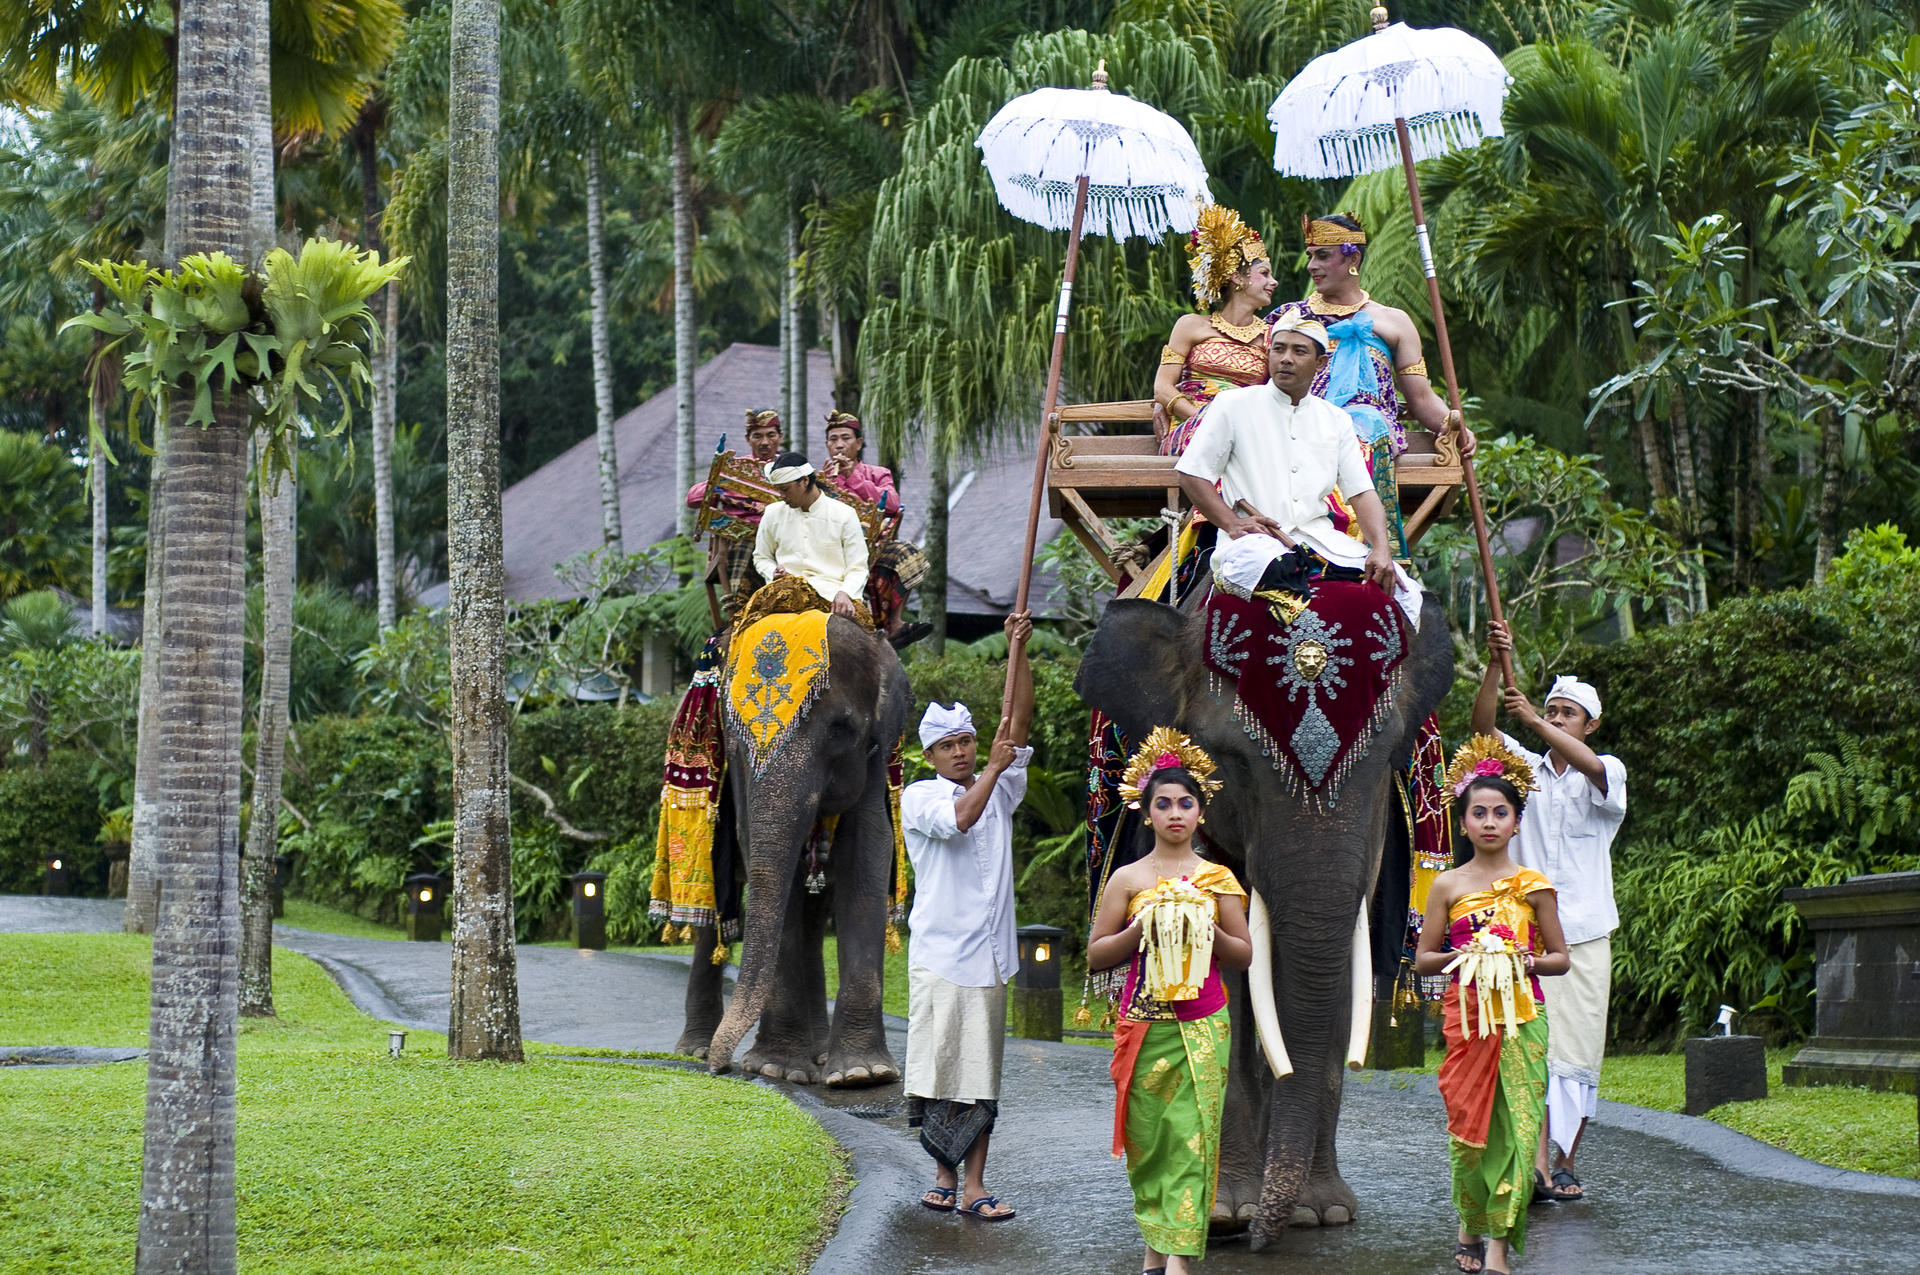 Elephants can make weddings in Bali a memorable spectacle.